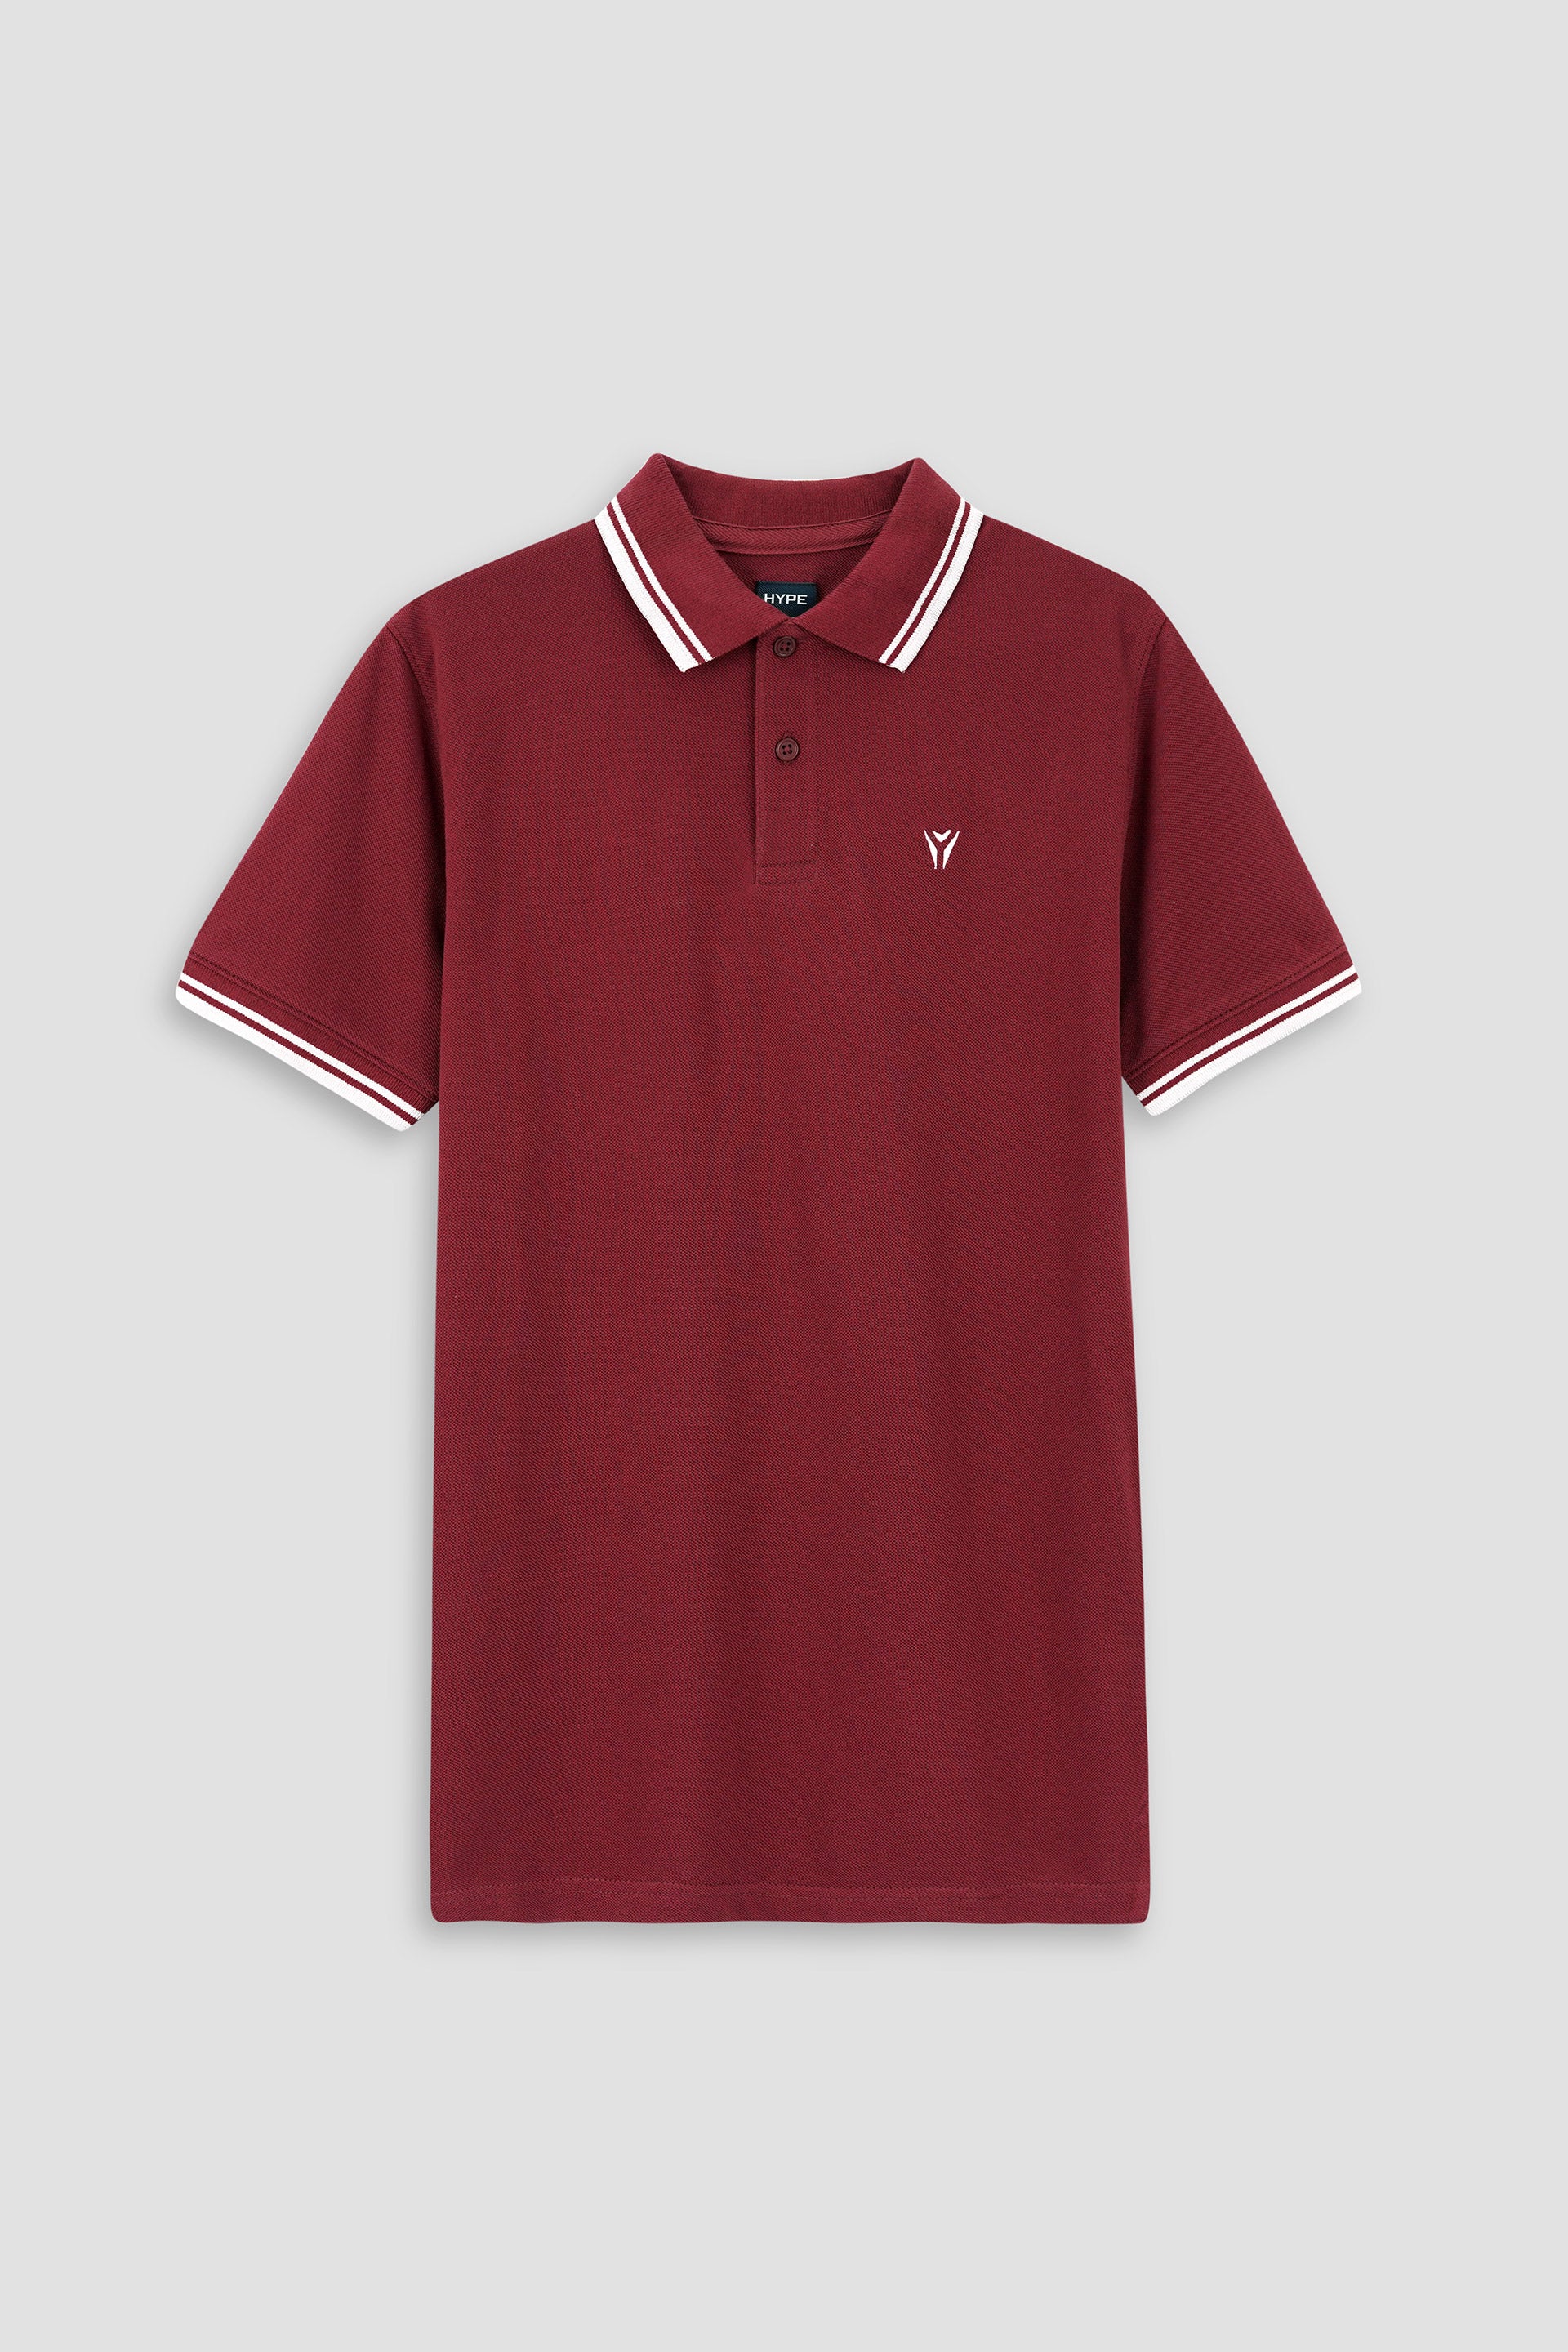 Embroidered Maroon Pique Polo Shirt 002479